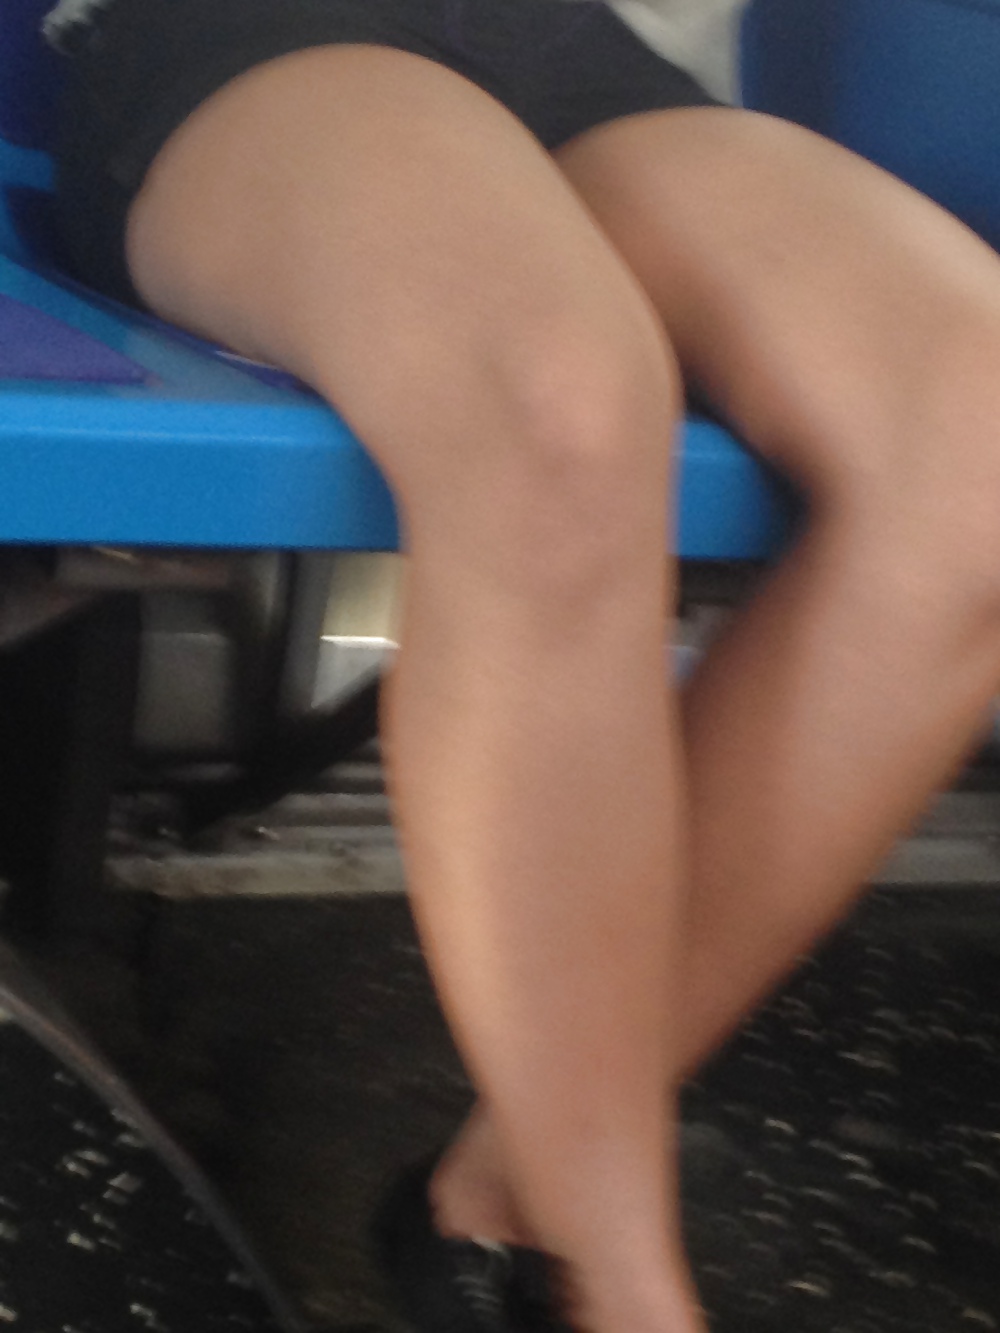 Just couldnt stop staring at her legs. #17542490